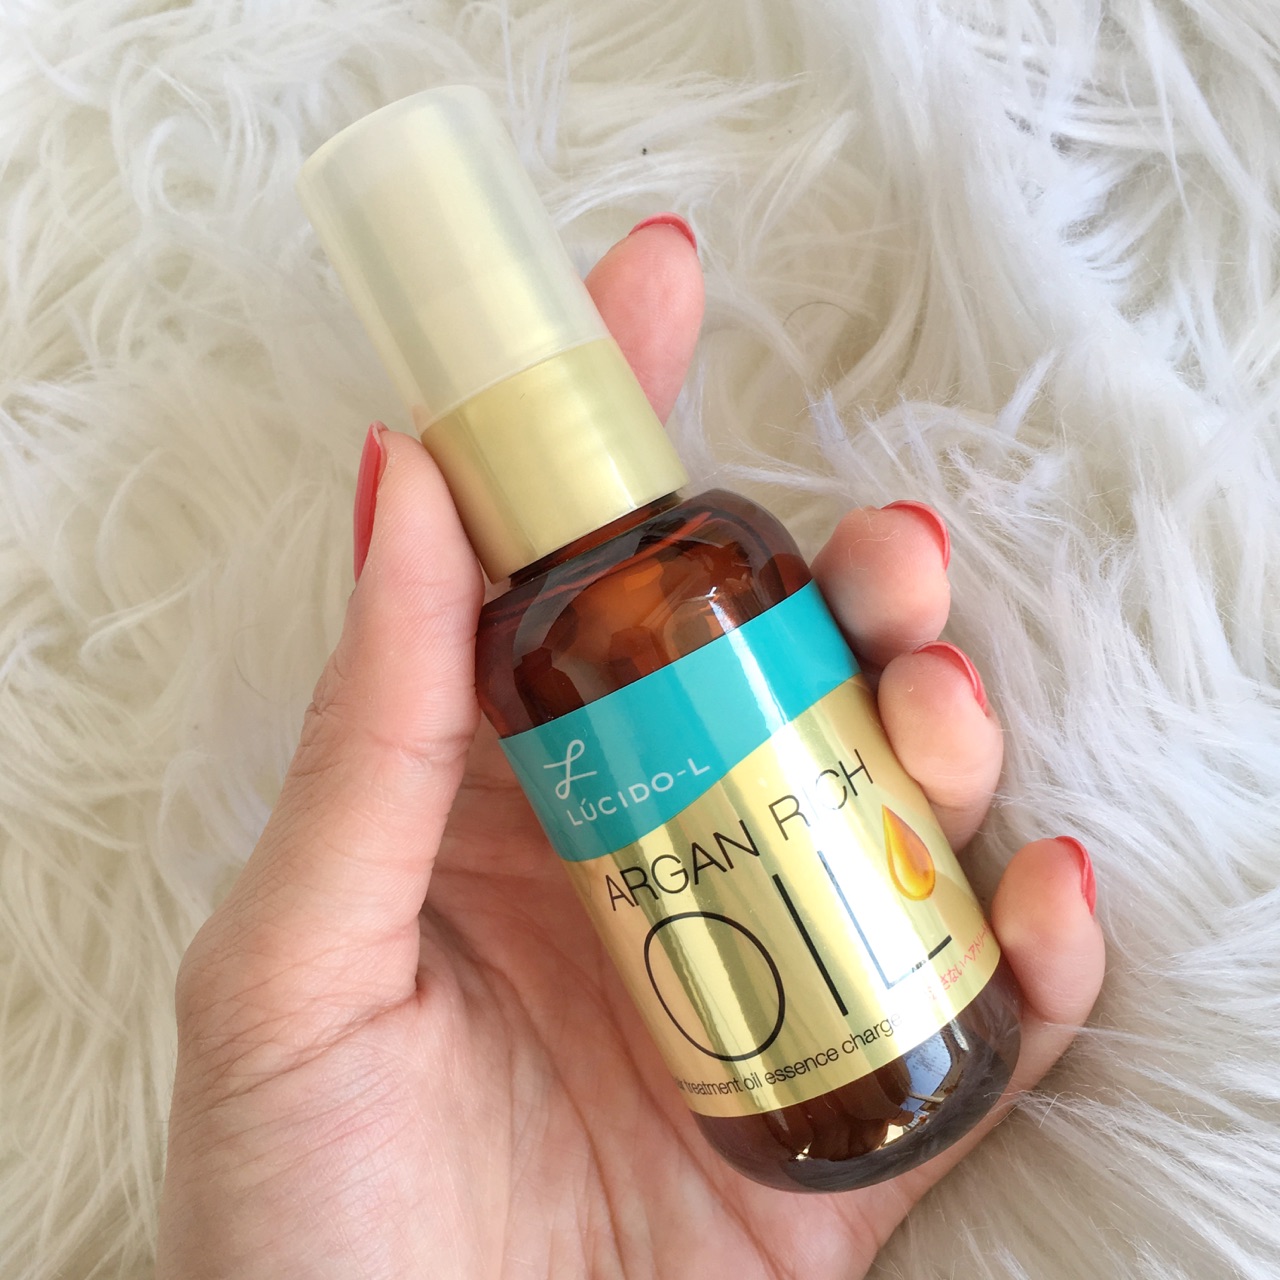 7 Ways to Use Argan Oil for Hair Fight Frizz Repair and Boost Shine